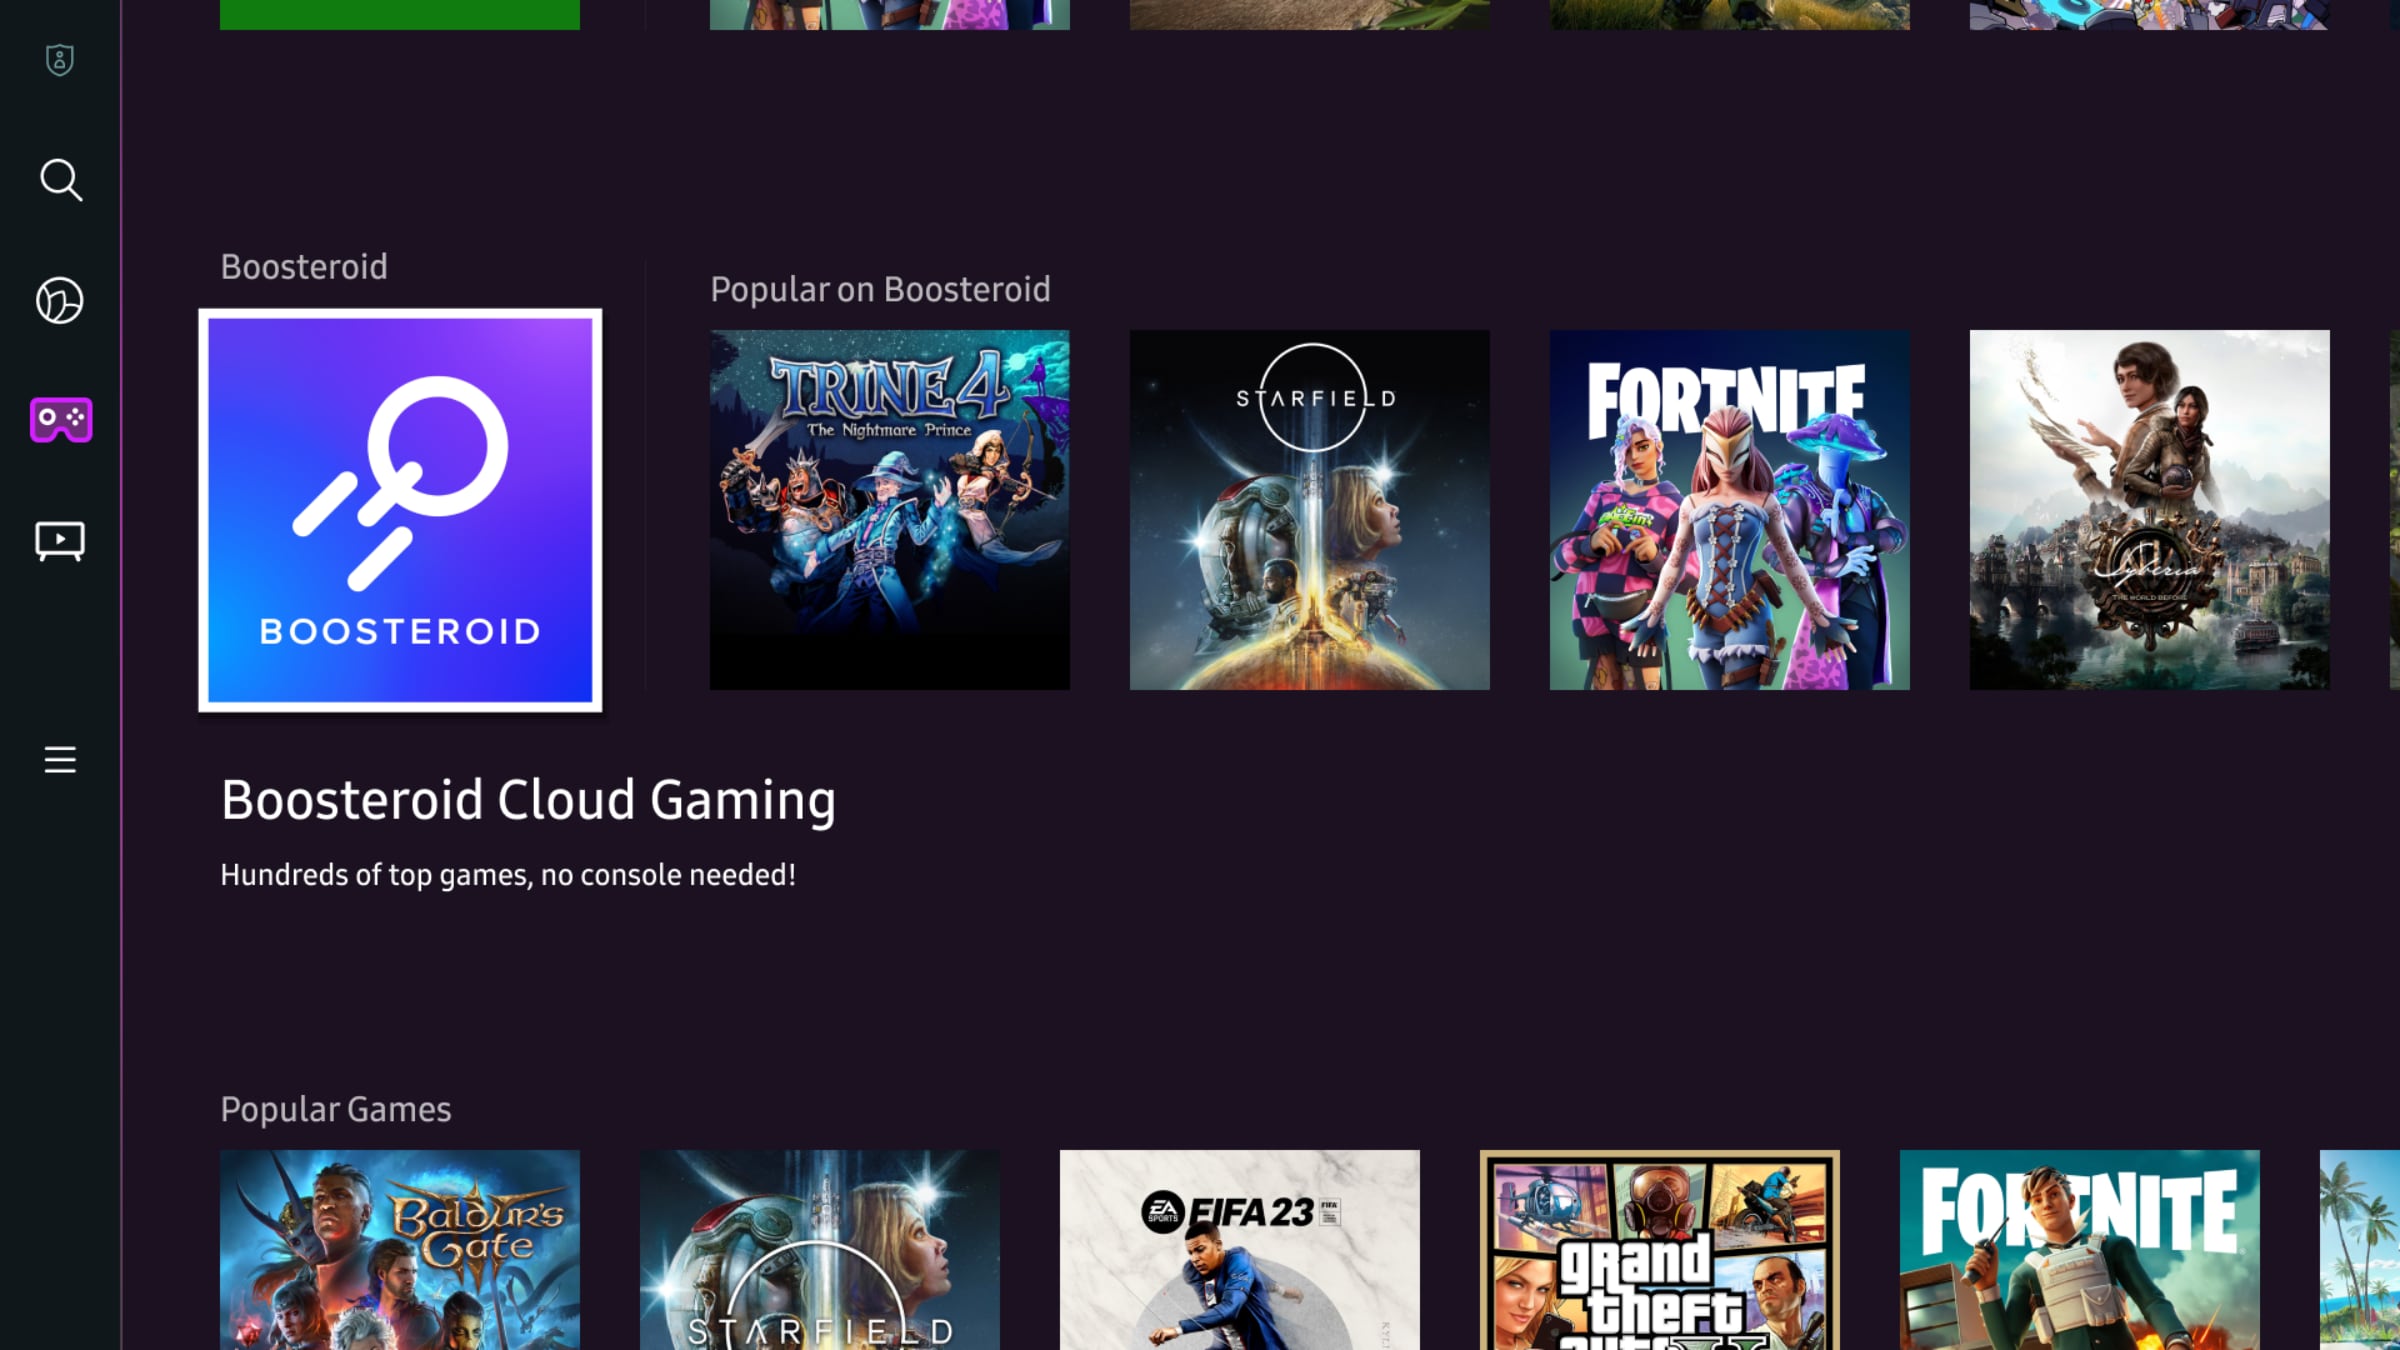 Xbox Cloud Gaming Coming To Quest For Streaming 2D Games